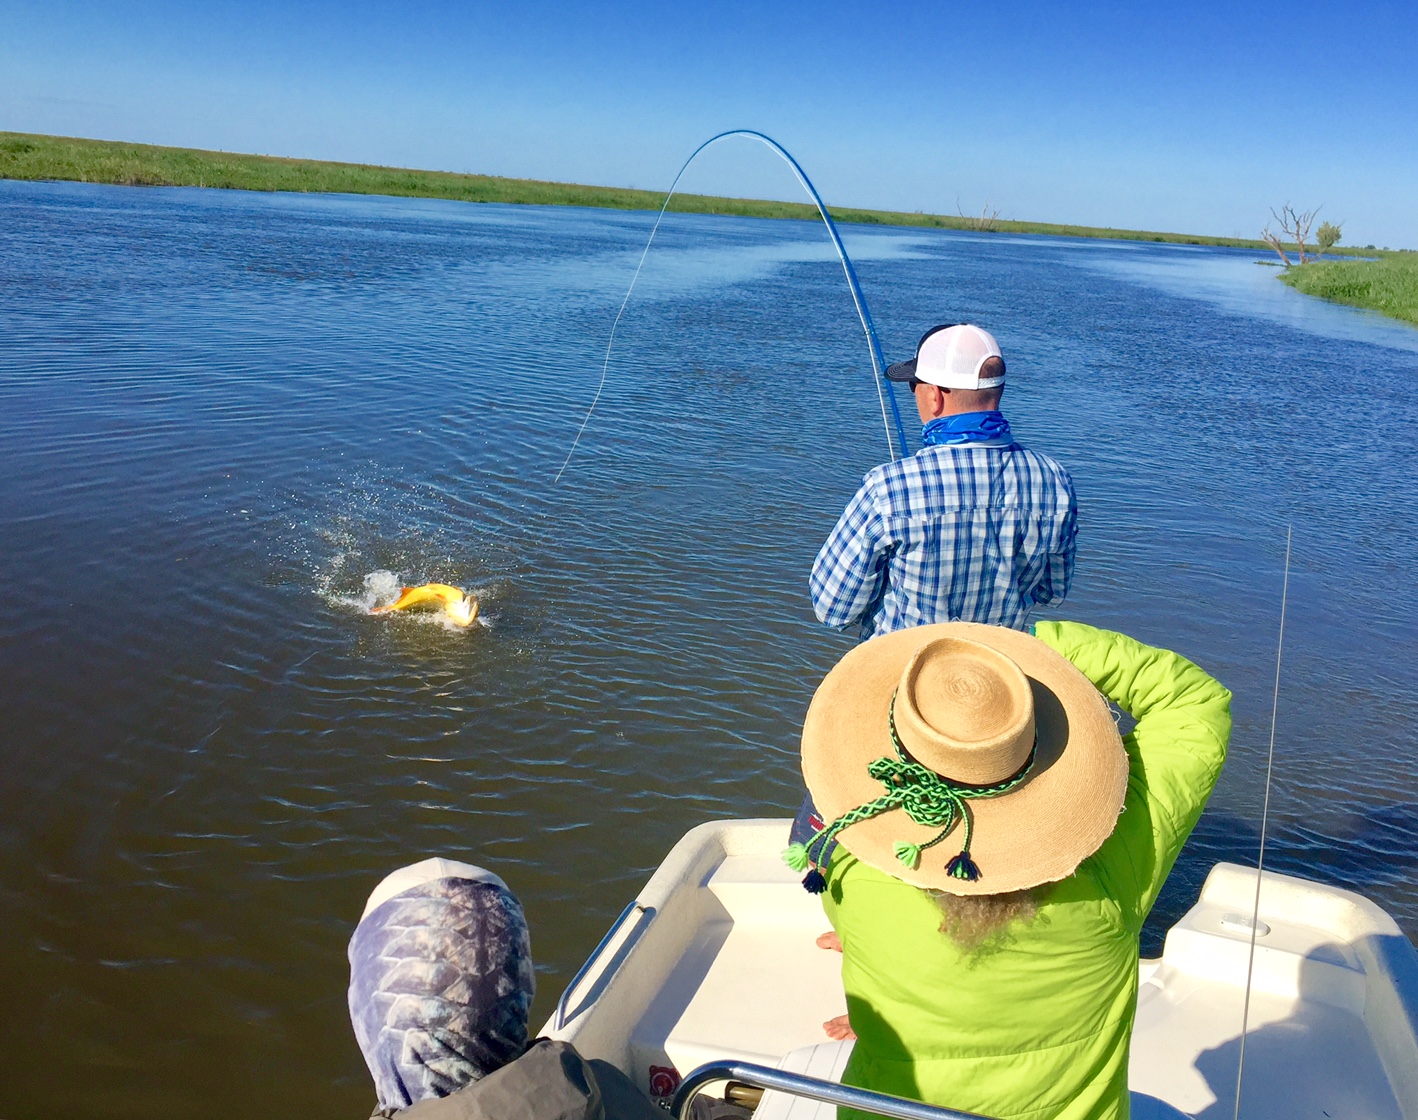 An angler reels in a Golden Dorado on the Paraná River system in Argentina.